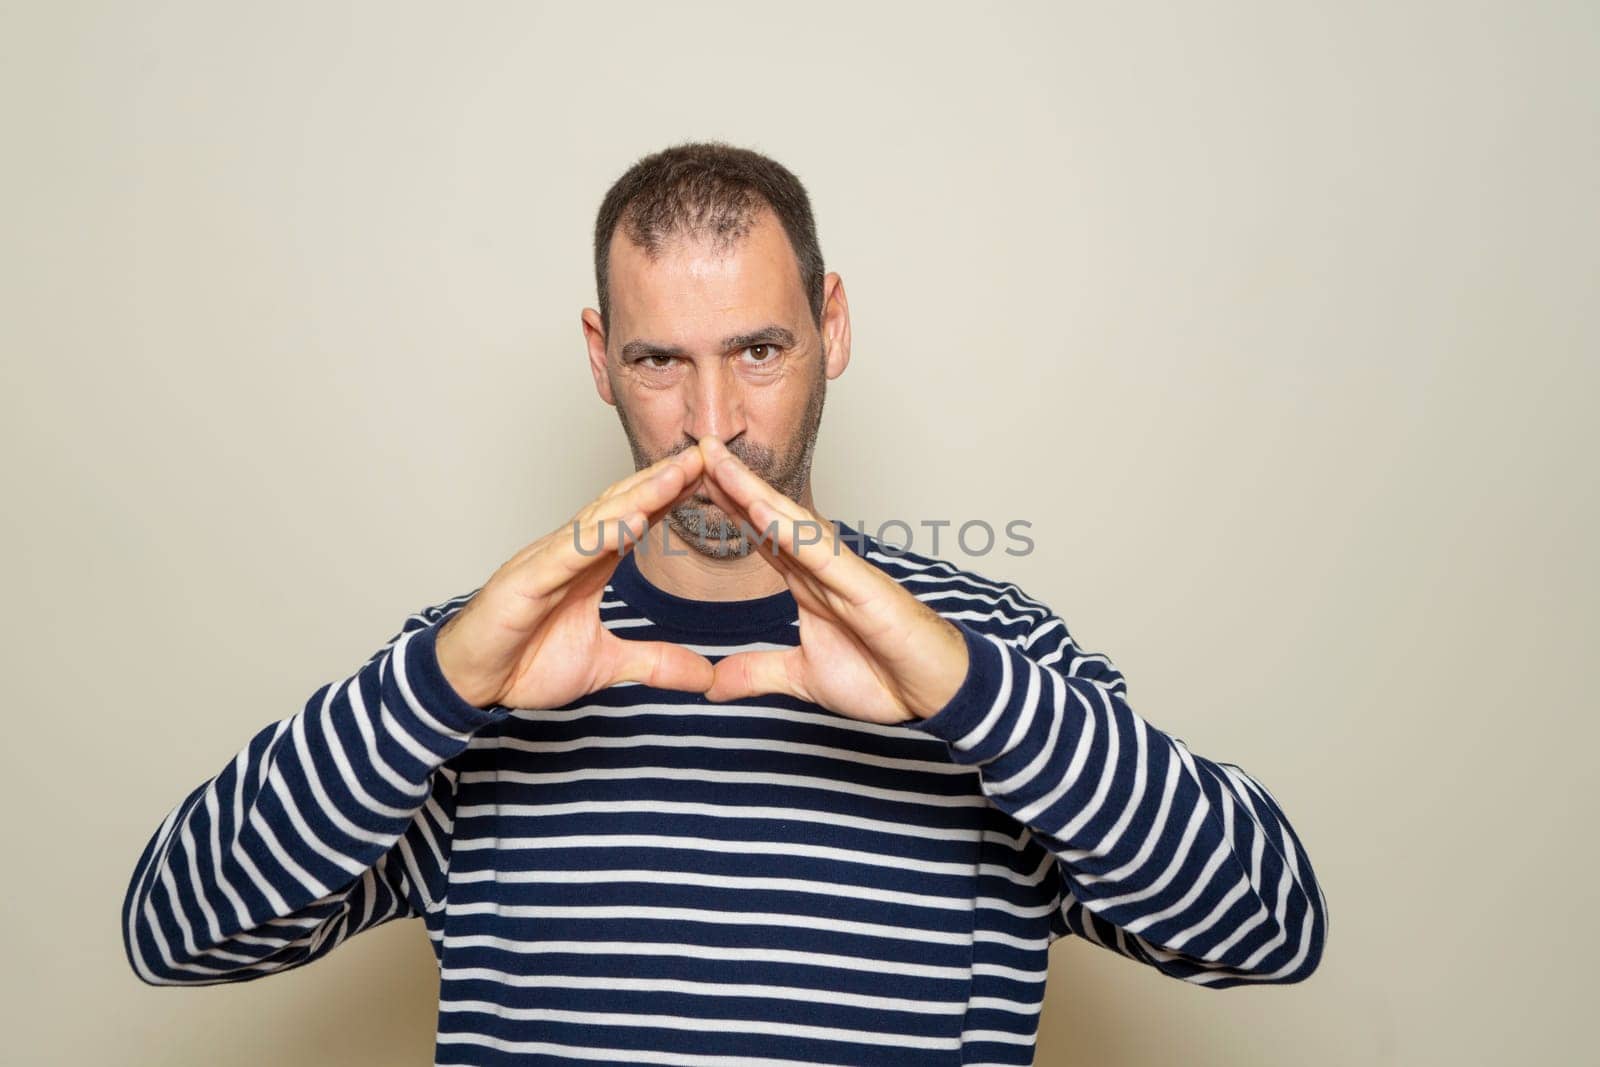 Hispanic man with a beard with his fingertips together in an expression of evil, cunning and cold planning a crime. Isolated on beige background. by Barriolo82